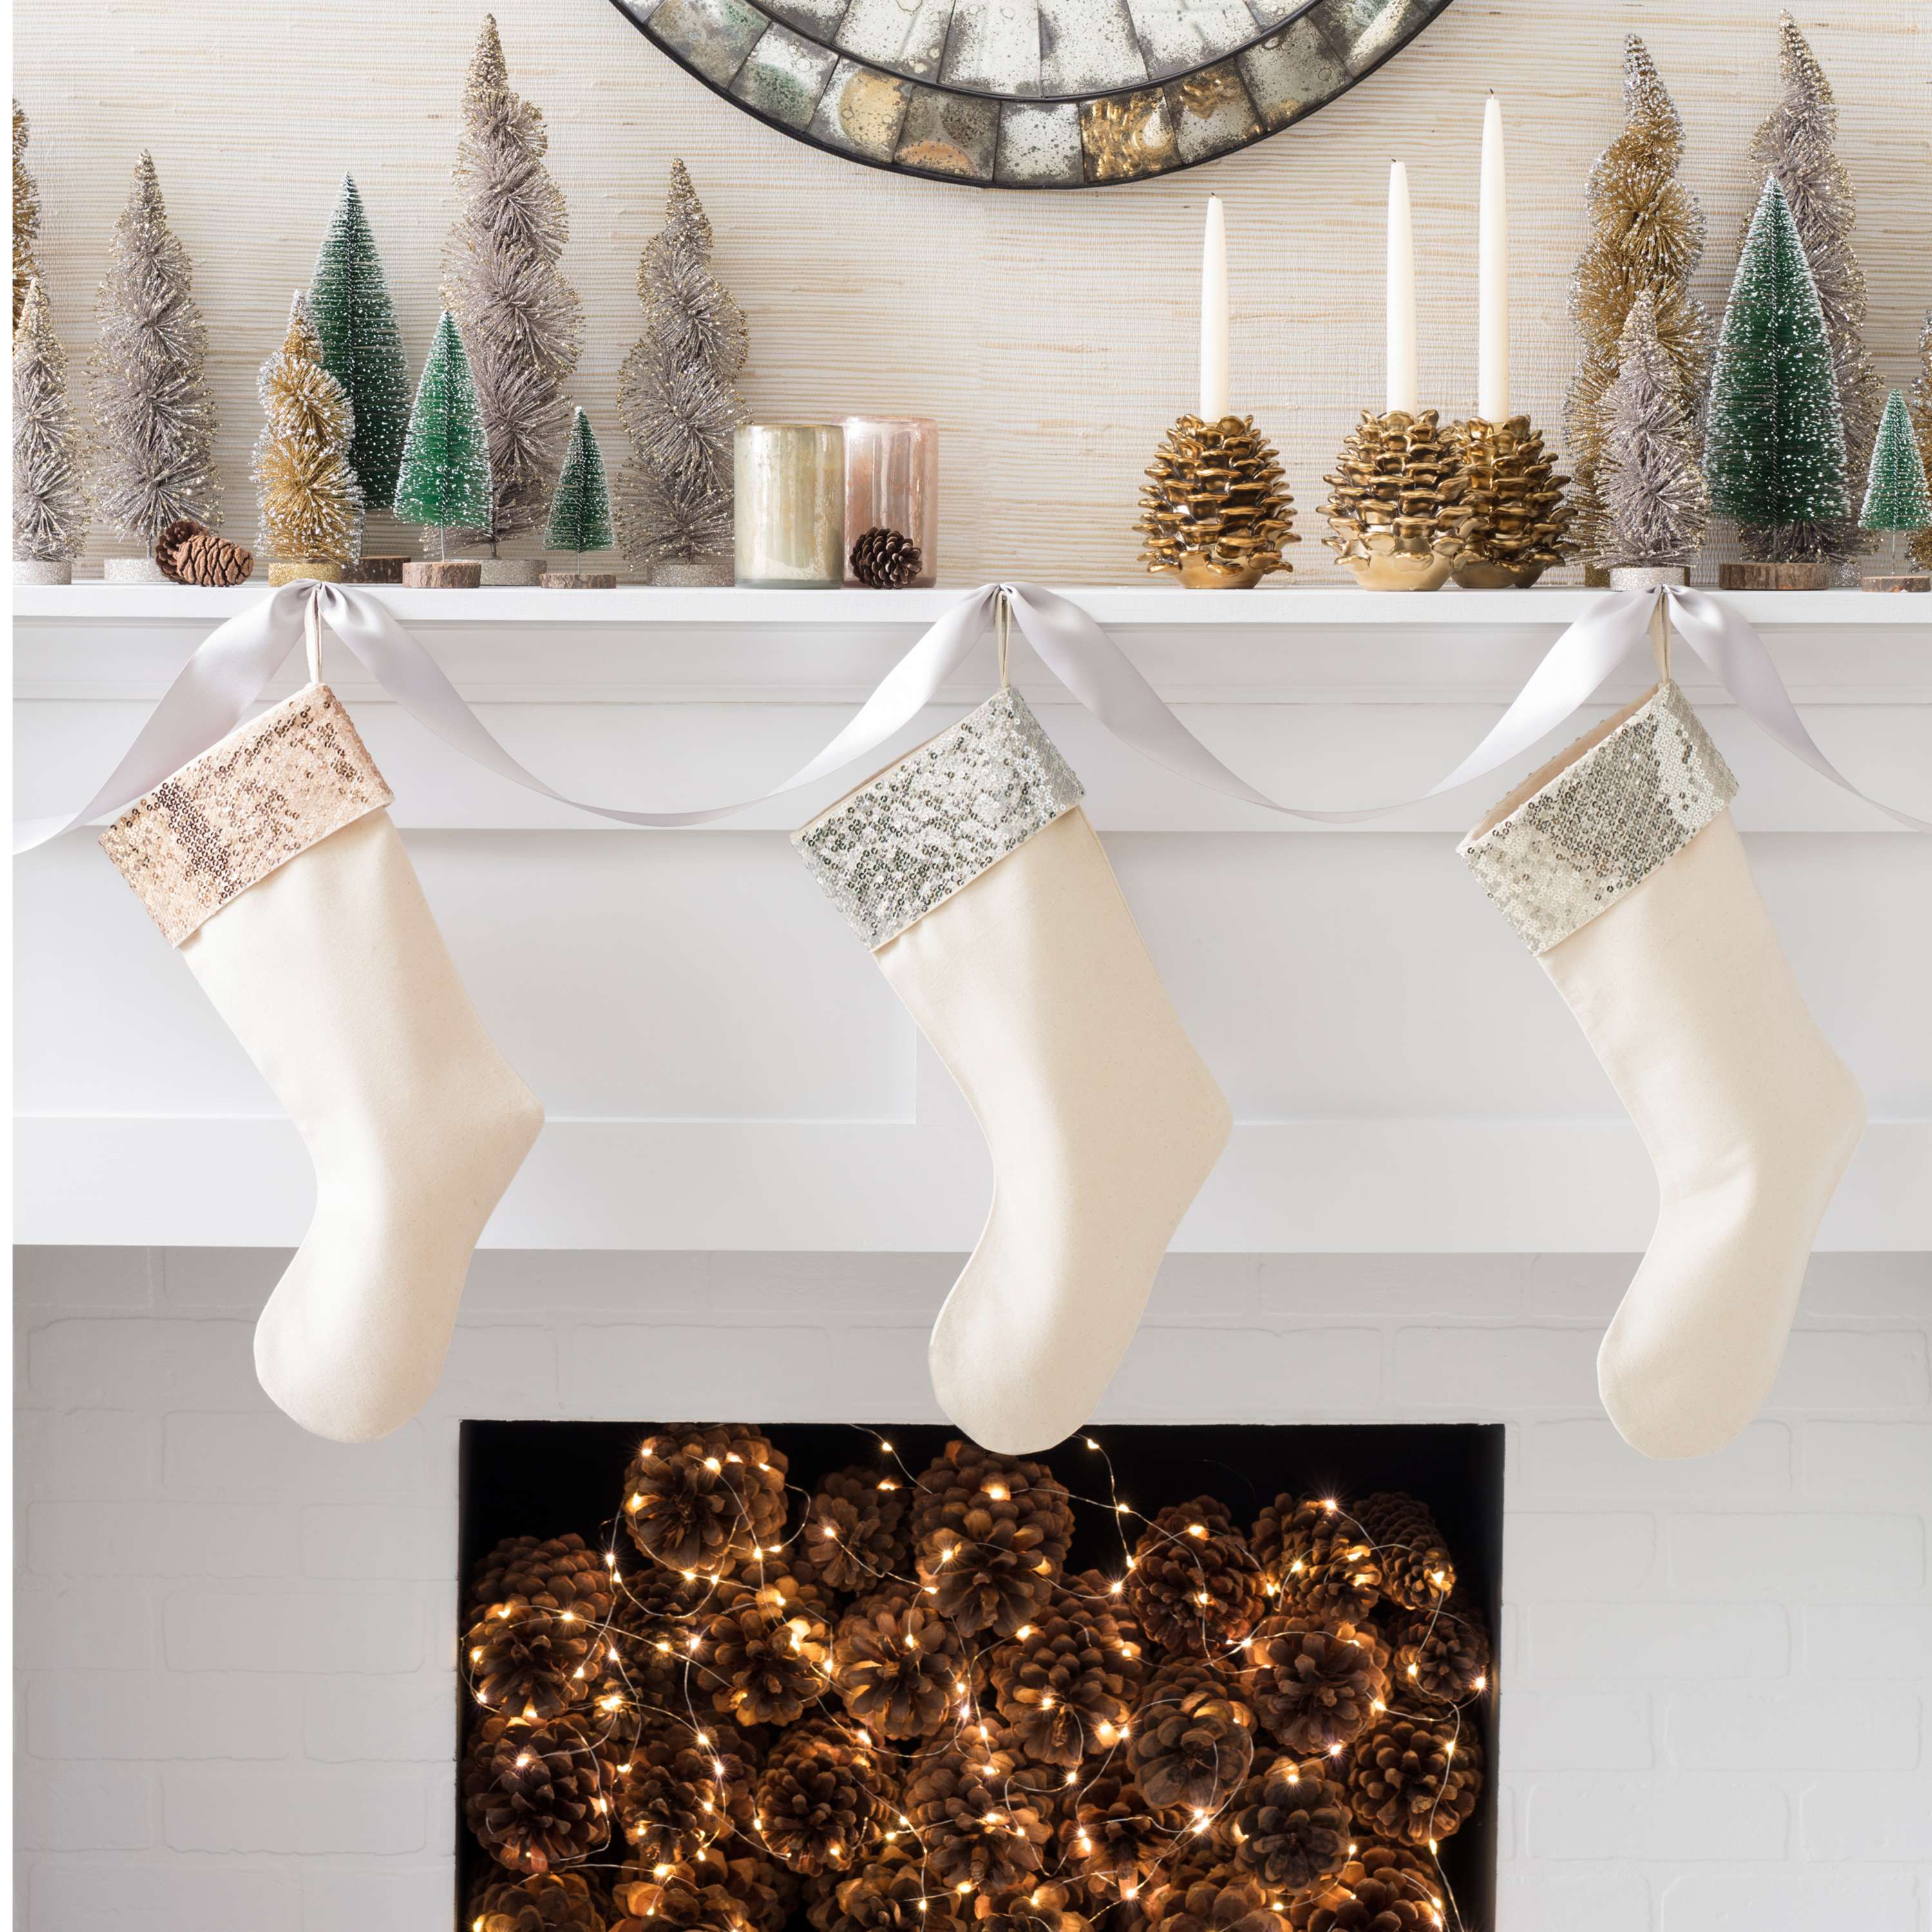 Bring on the Bling: Holiday Decorating with Metallic Accents | Fresh ...